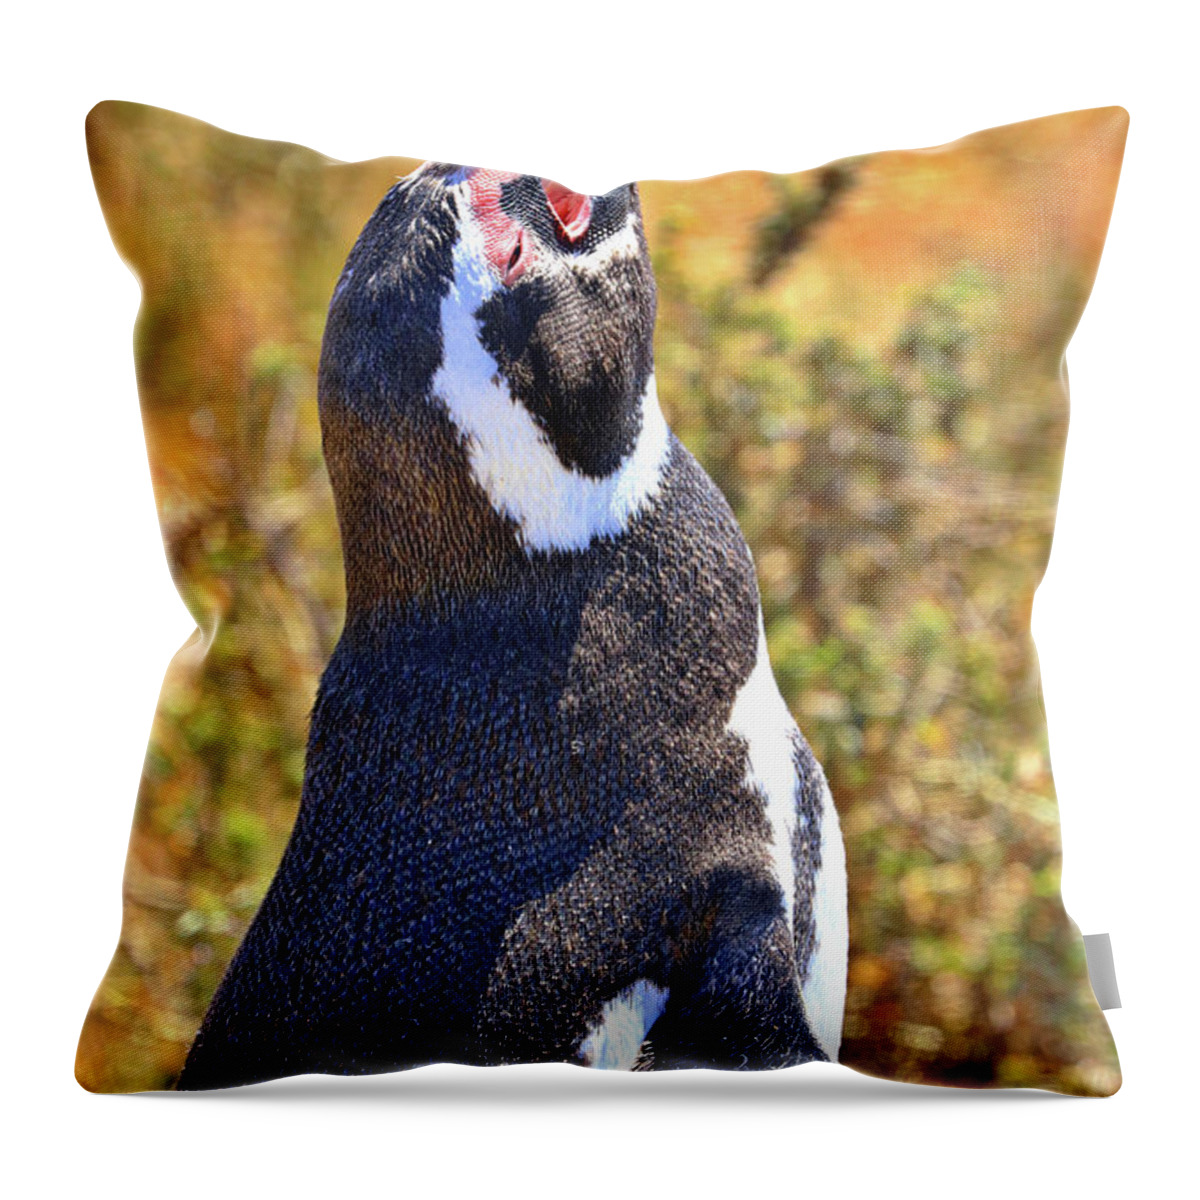 Penguins Tombo Reserve Puerto Madryn Argentina Throw Pillow featuring the photograph Penguins Tombo Reserve Puerto Madryn Argentina #12 by Paul James Bannerman